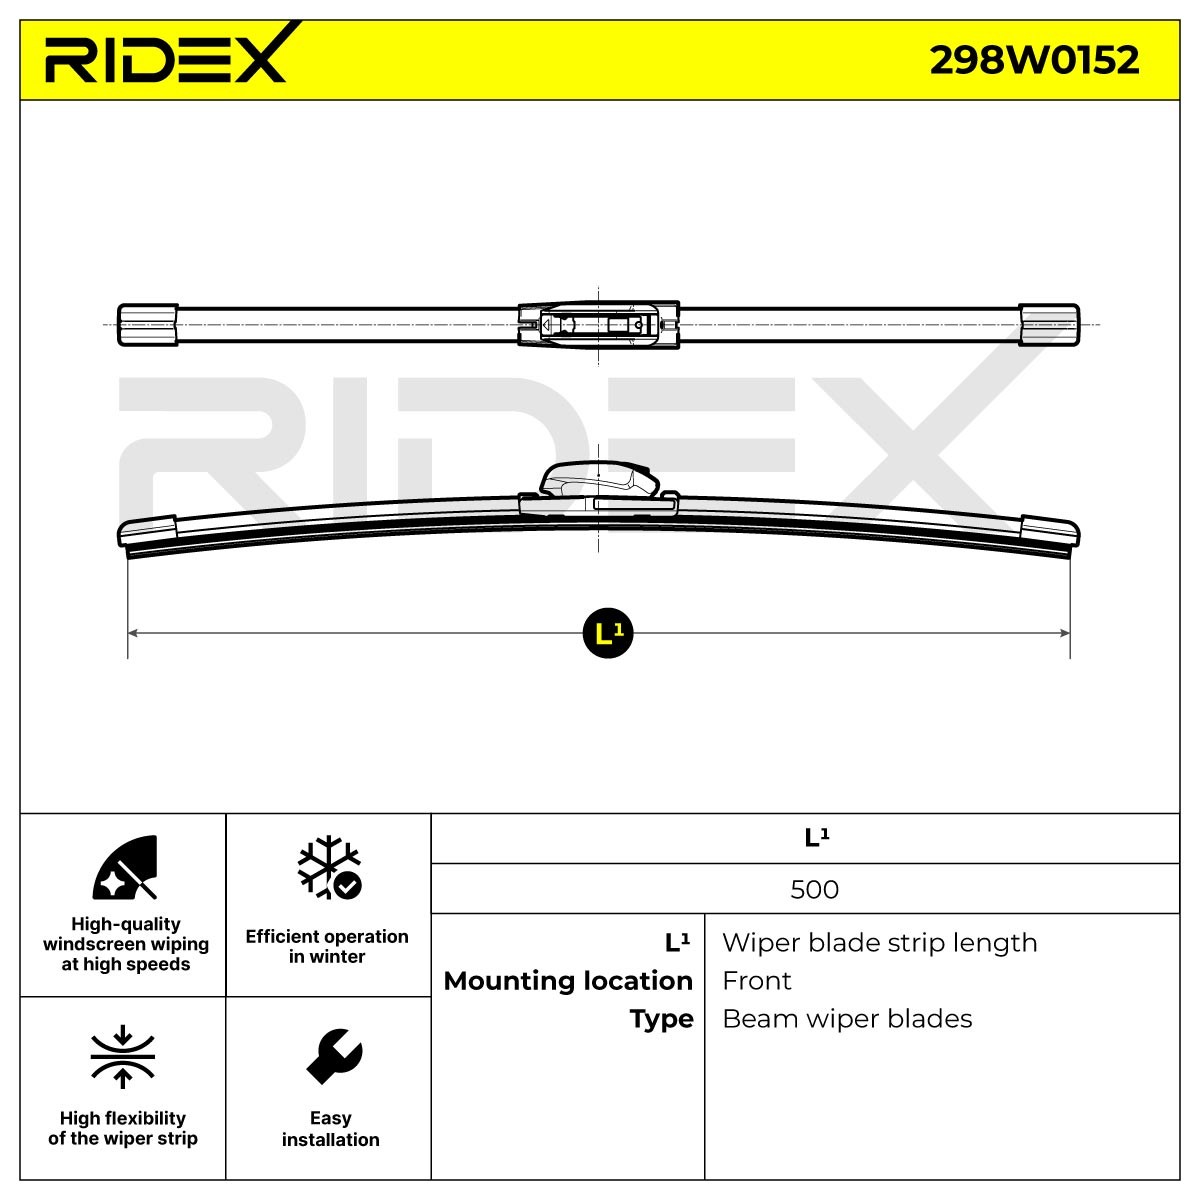 298W0152 Window wiper 298W0152 RIDEX 500 mm Front, Beam, with spoiler, Flat, 20 Inch , Hook fixing